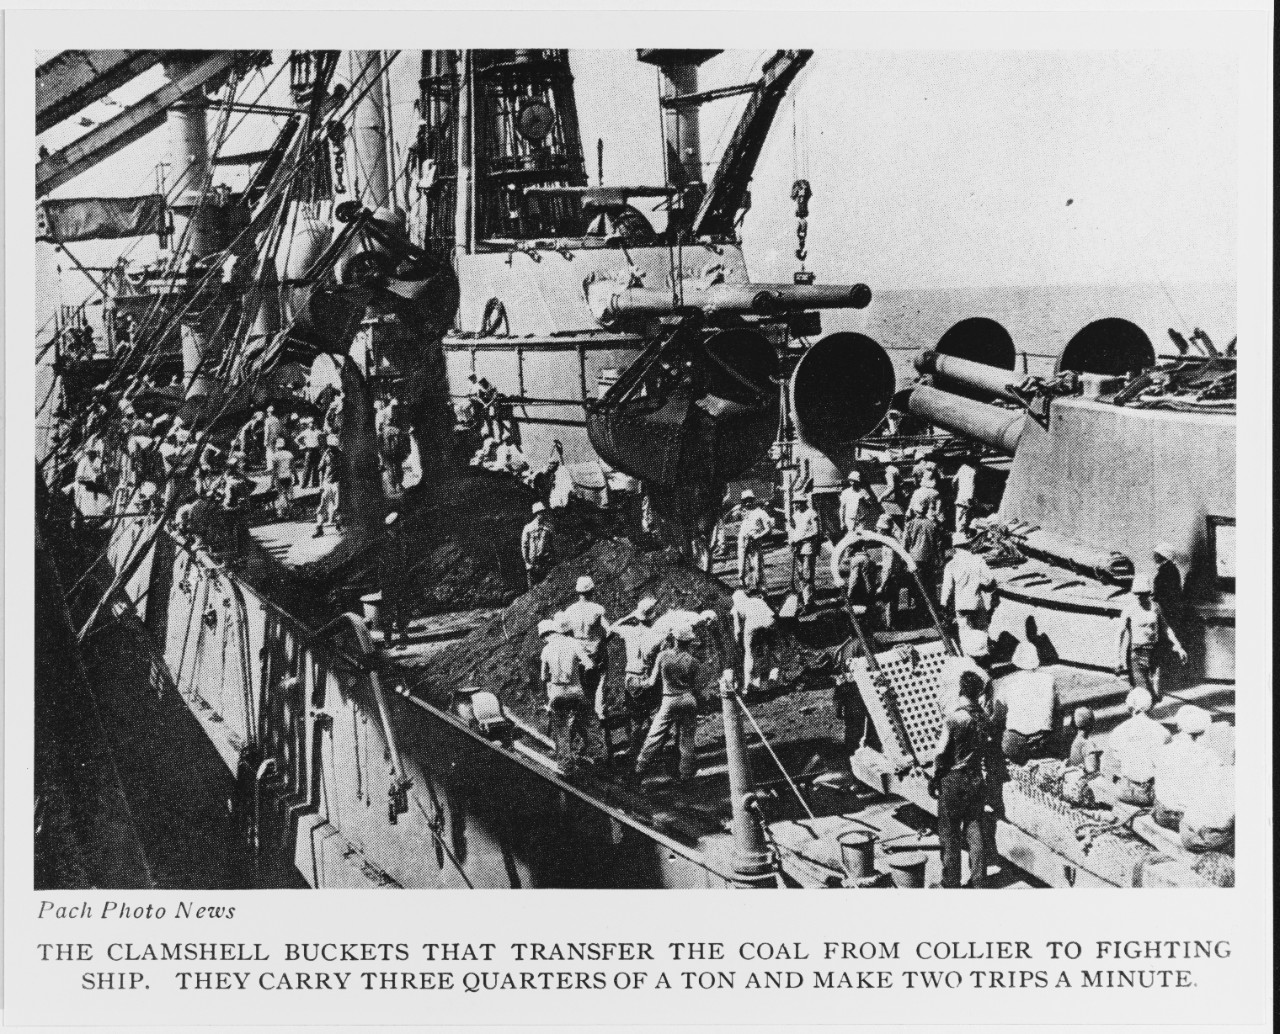 U.S. Navy Battleship receives coal from a Navy Collier, prior to World War I